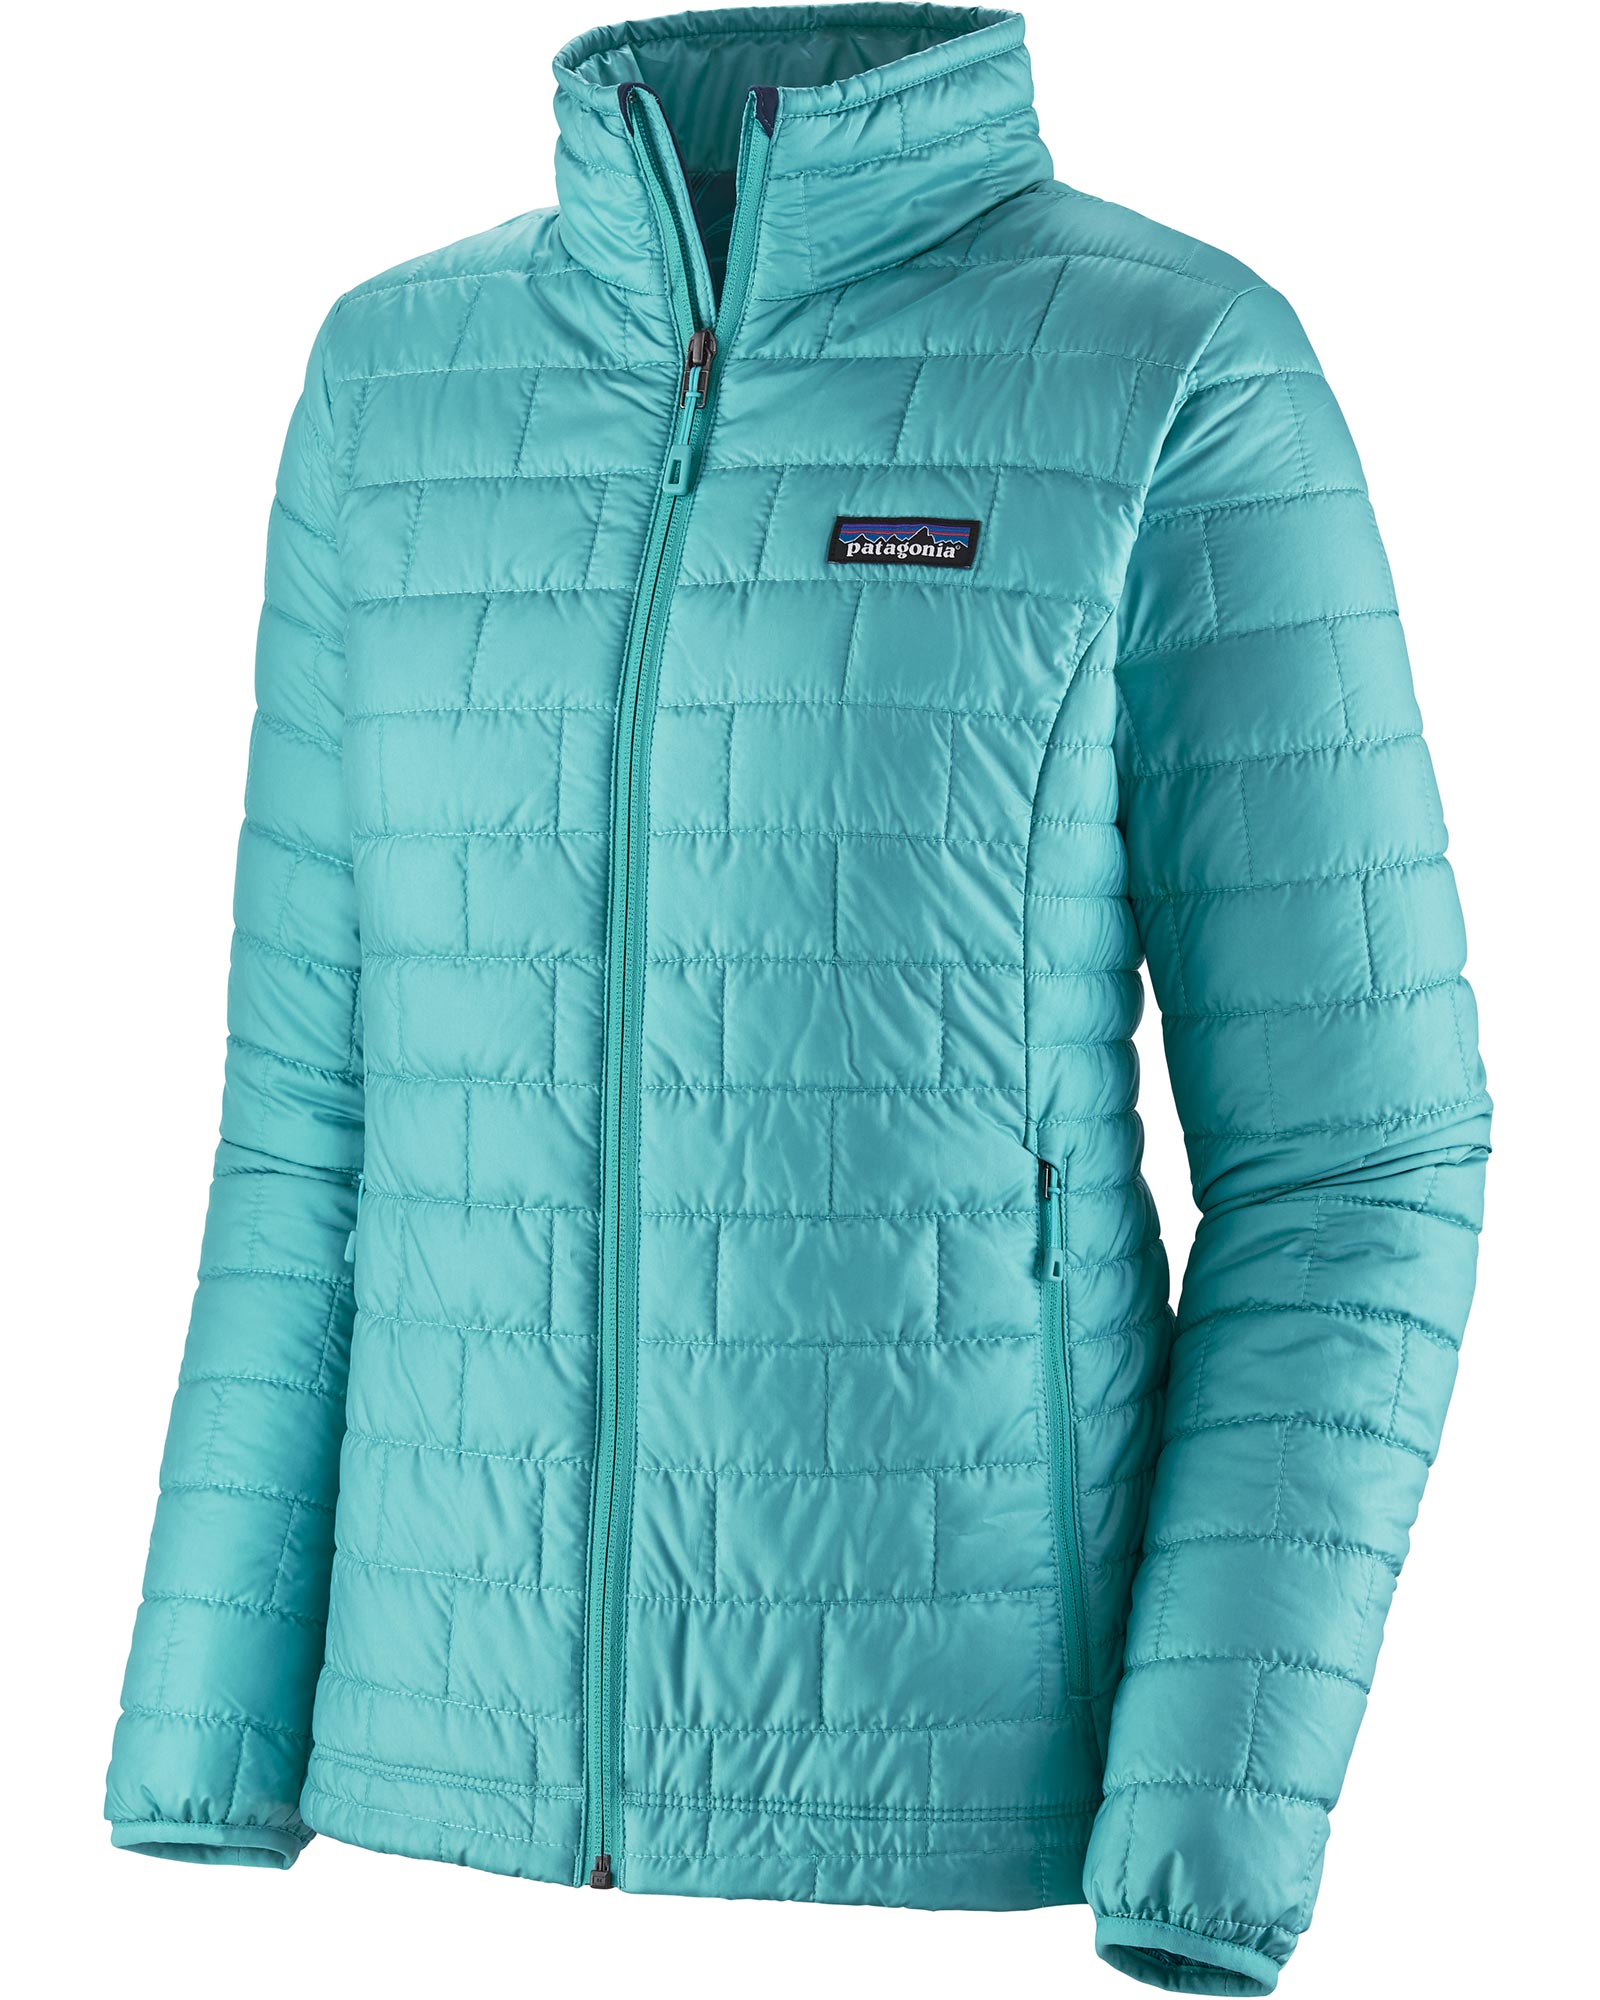 Patagonia Nano Puff Women’s Insulated Jacket - Chilled Blue S